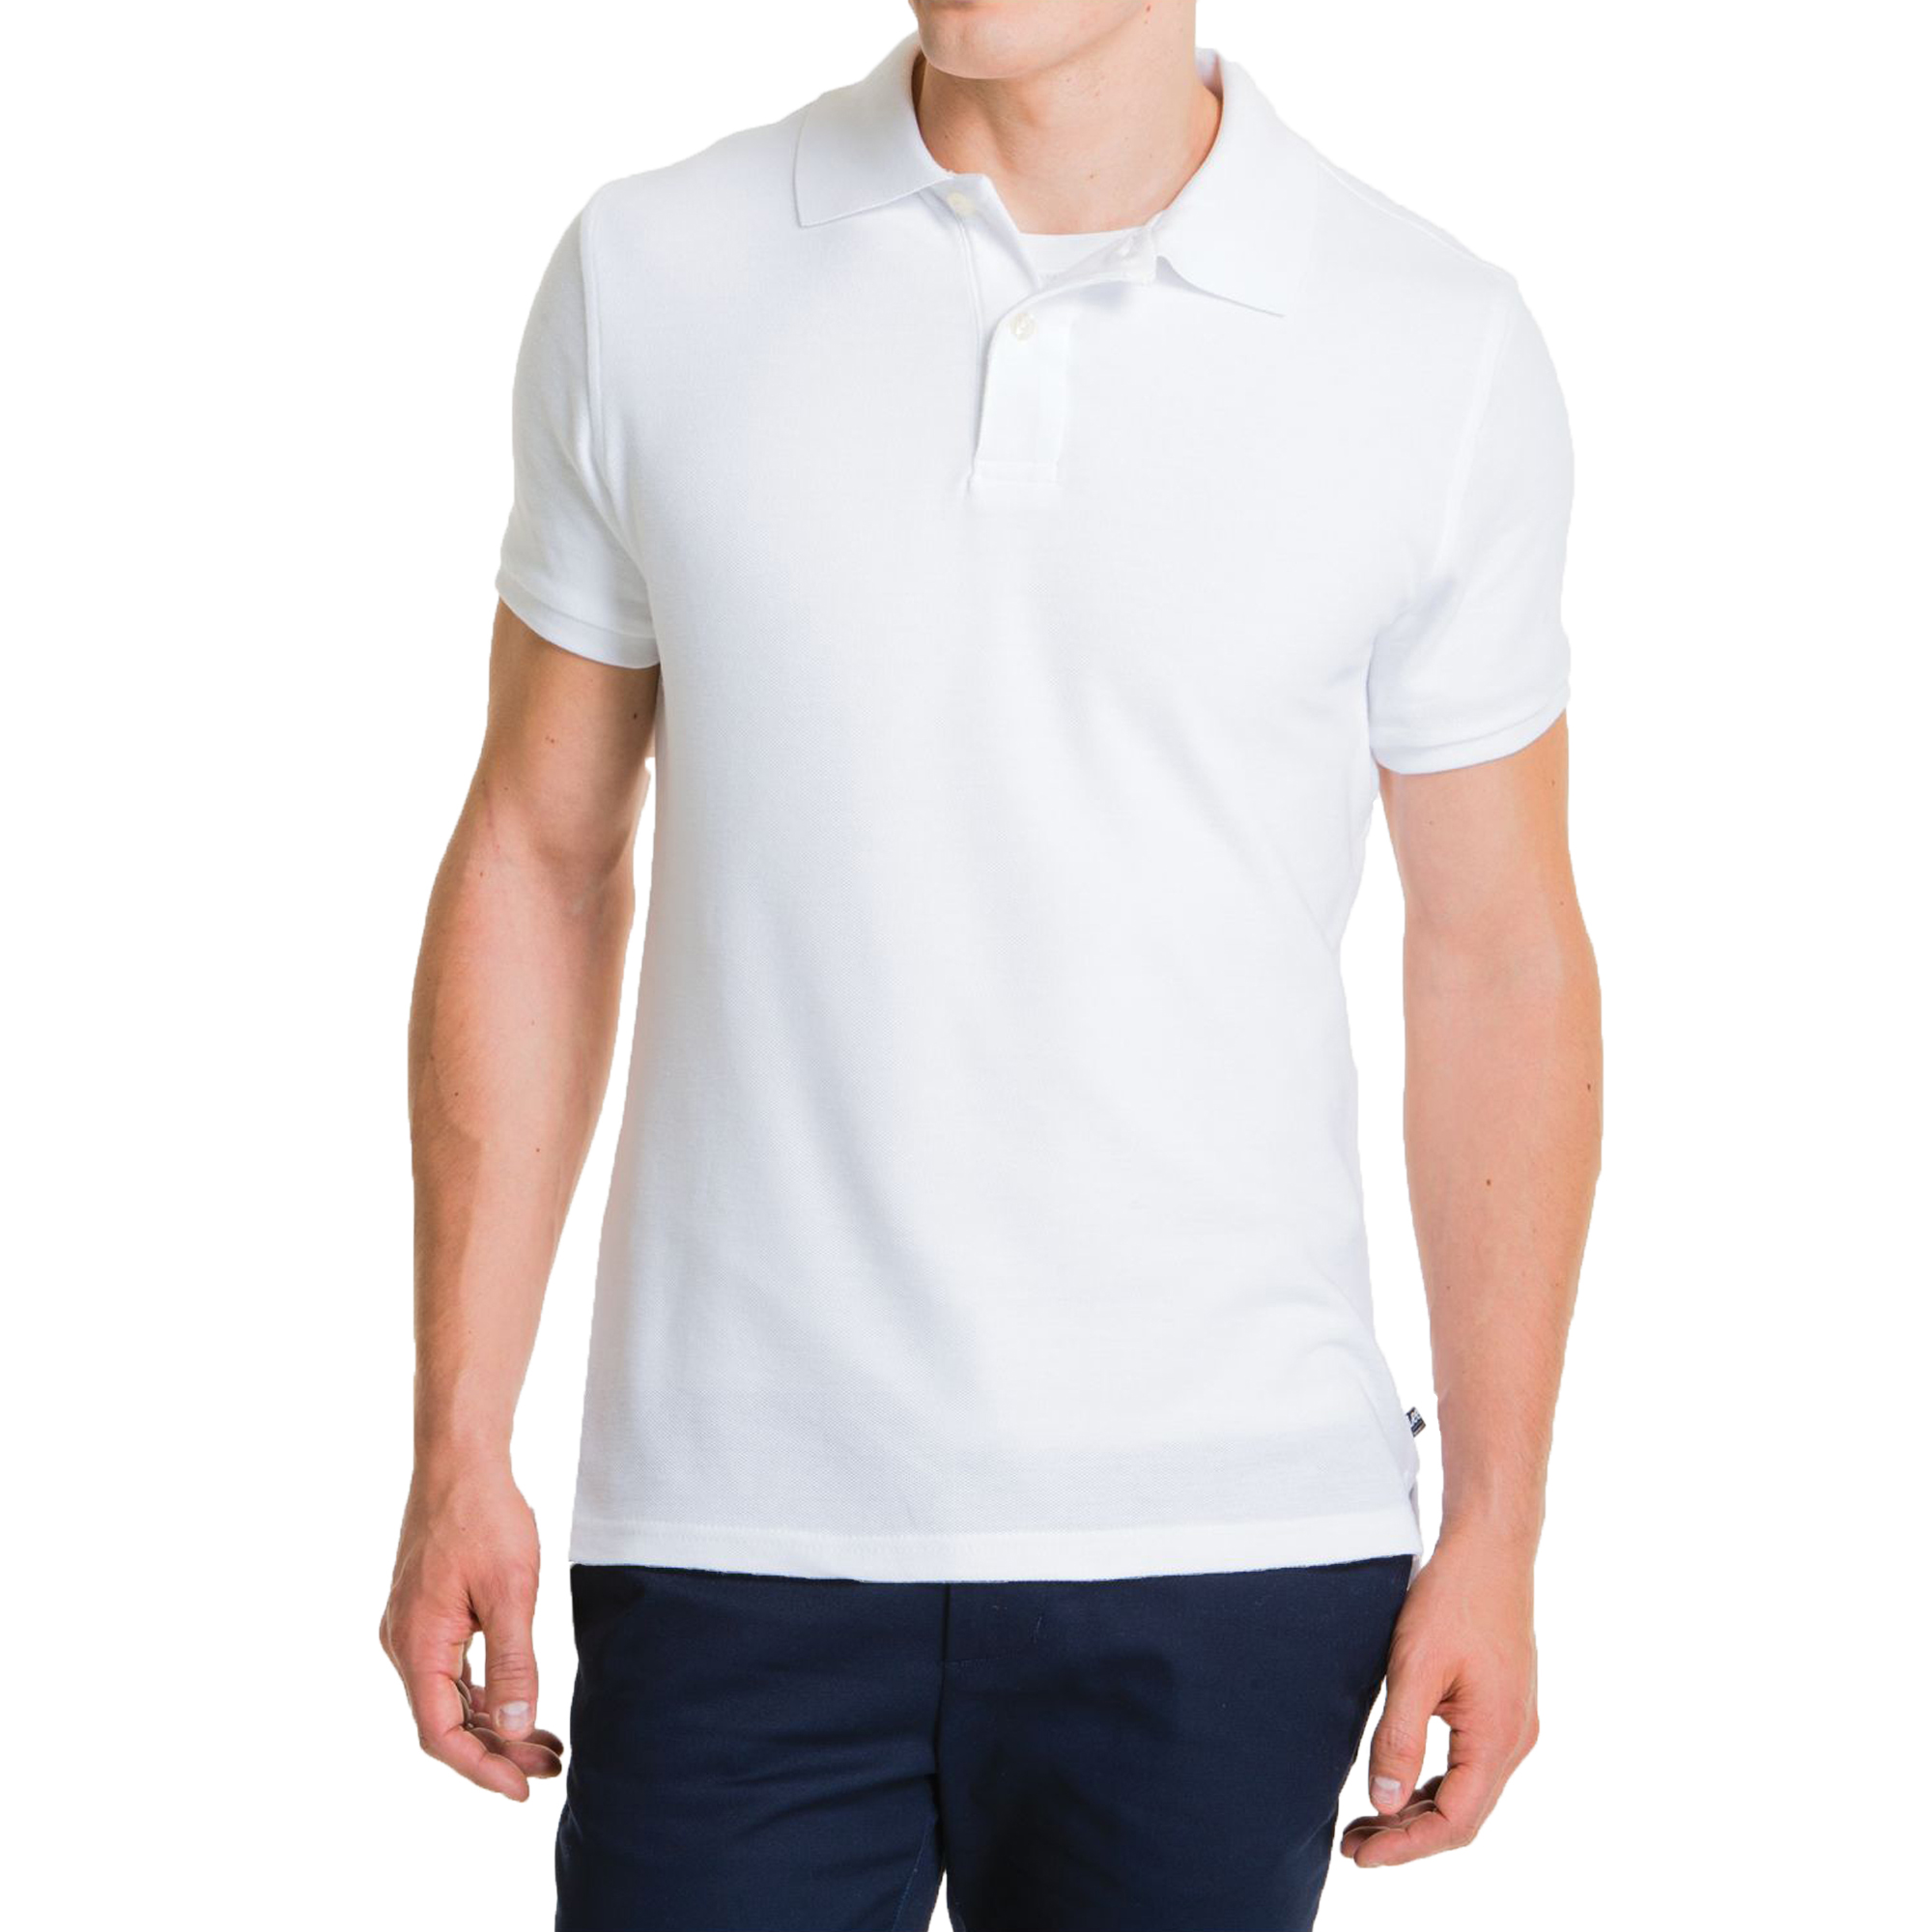 Lee Uniforms Young Mens Short Sleeve Polo - image 1 of 2